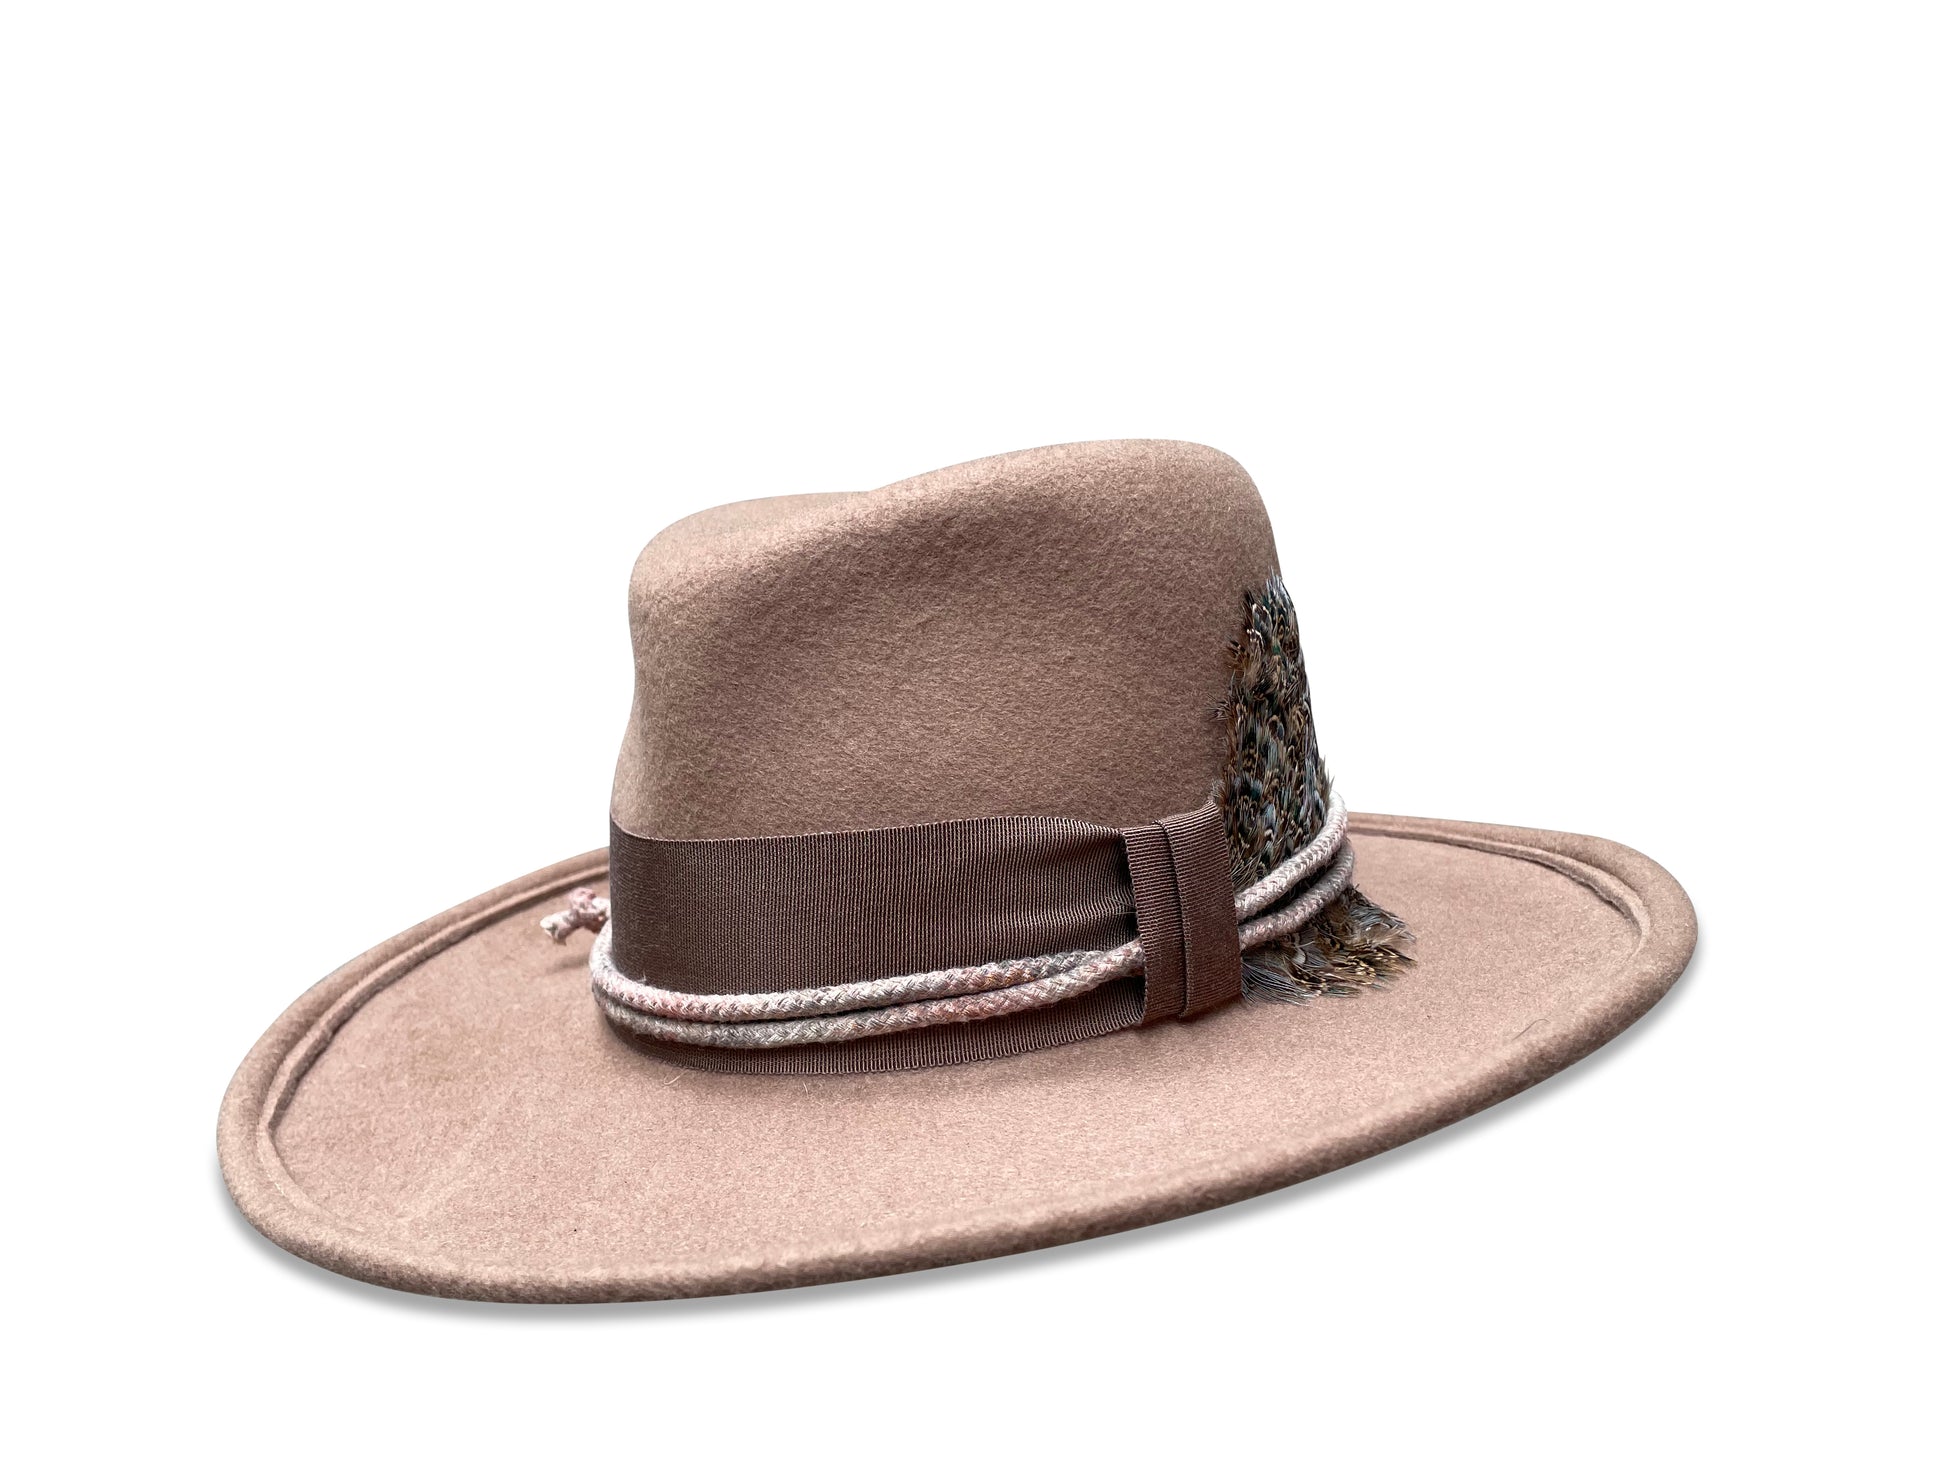 Boho Cowboy Hat for Women from Cha Cha's House of Ill Repute